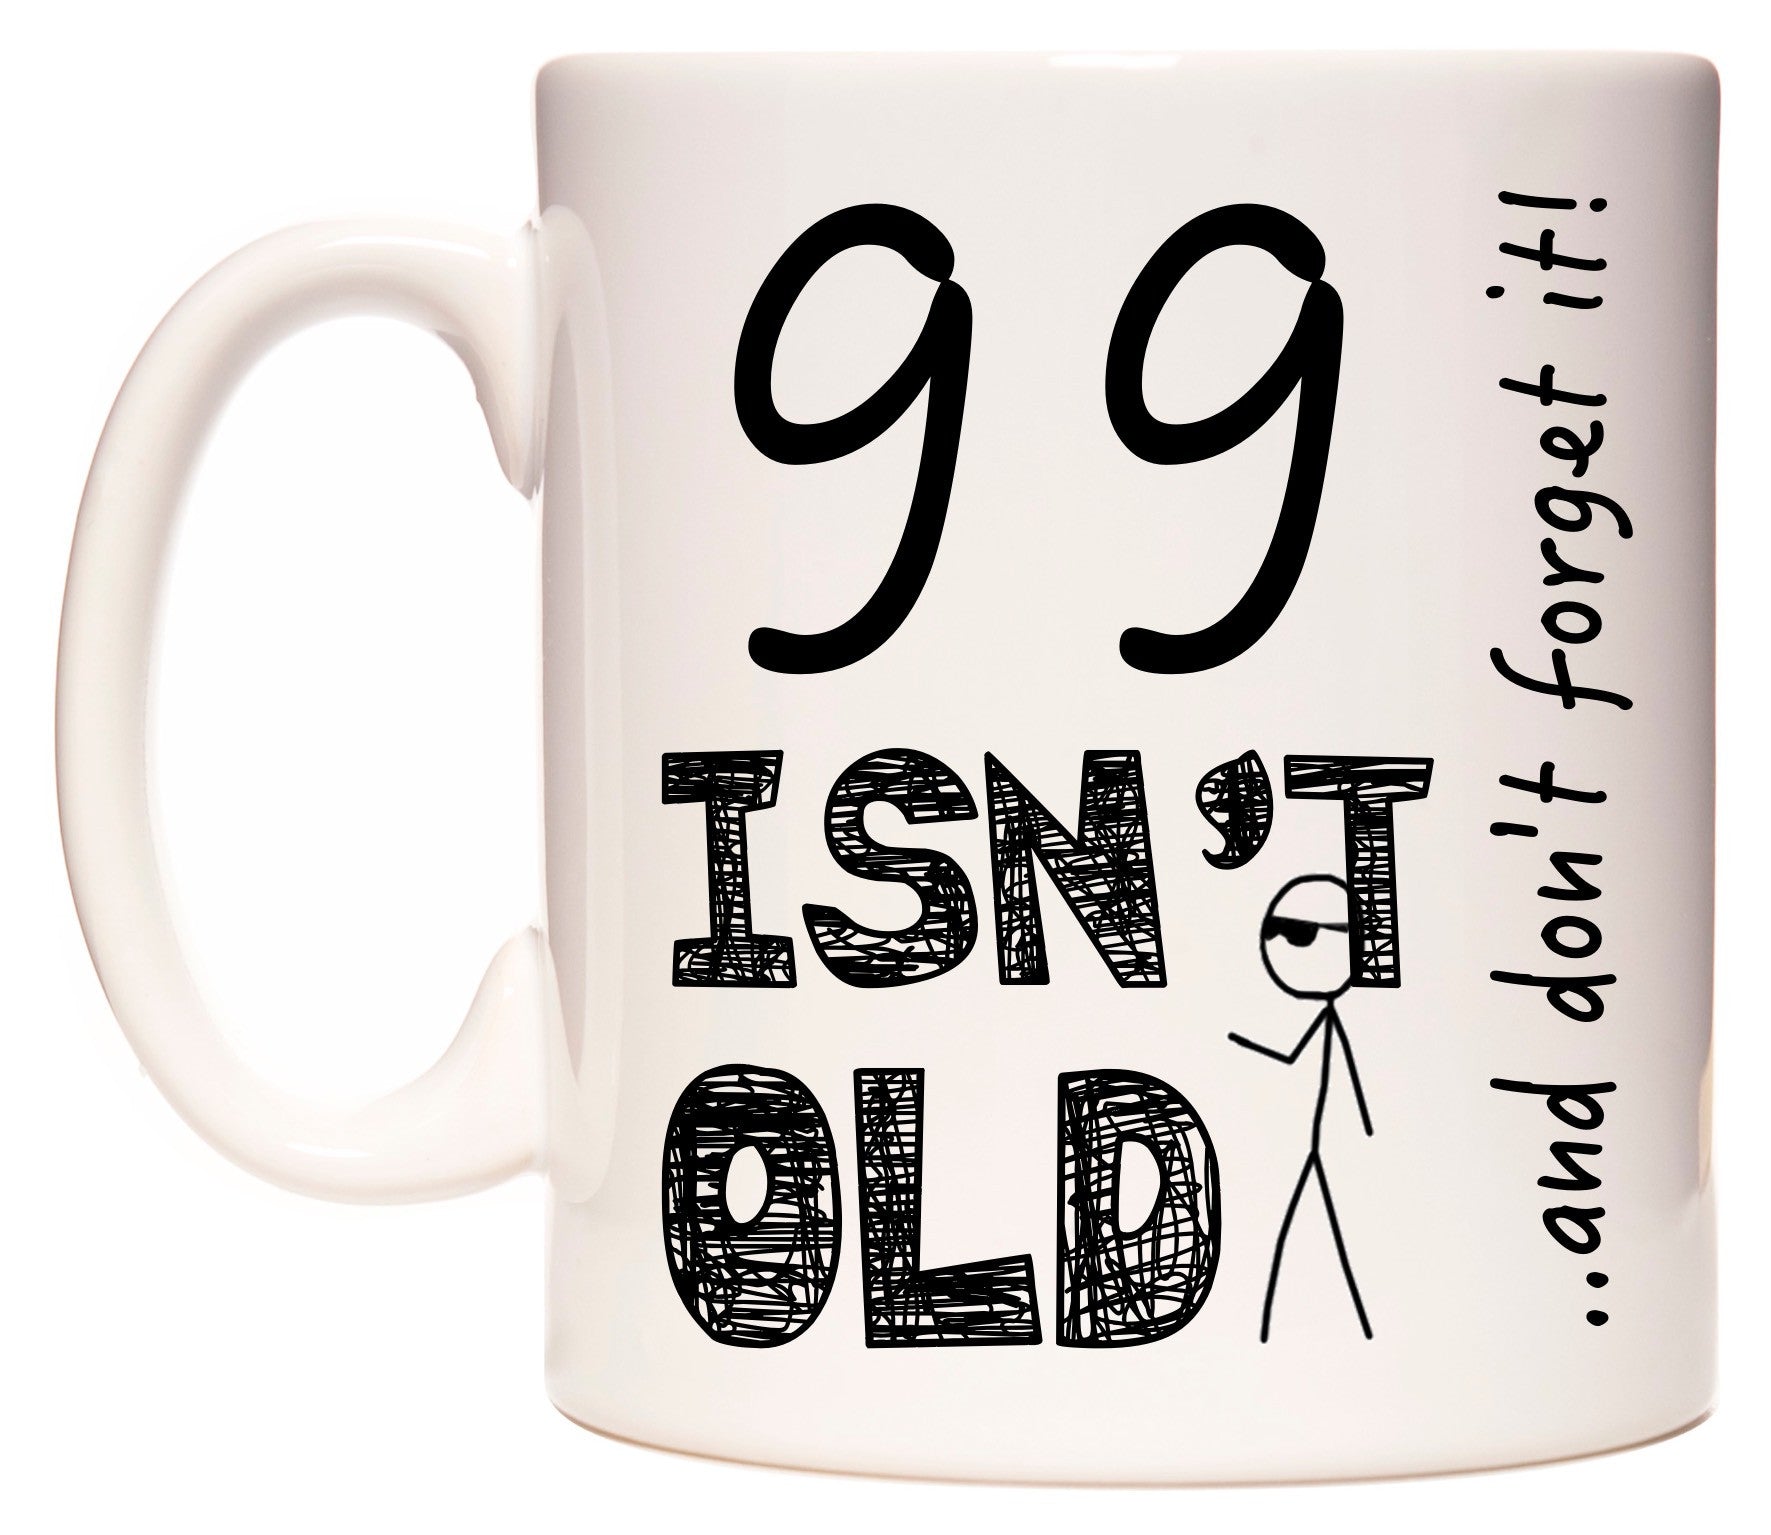 This mug features 99 Isn't Old